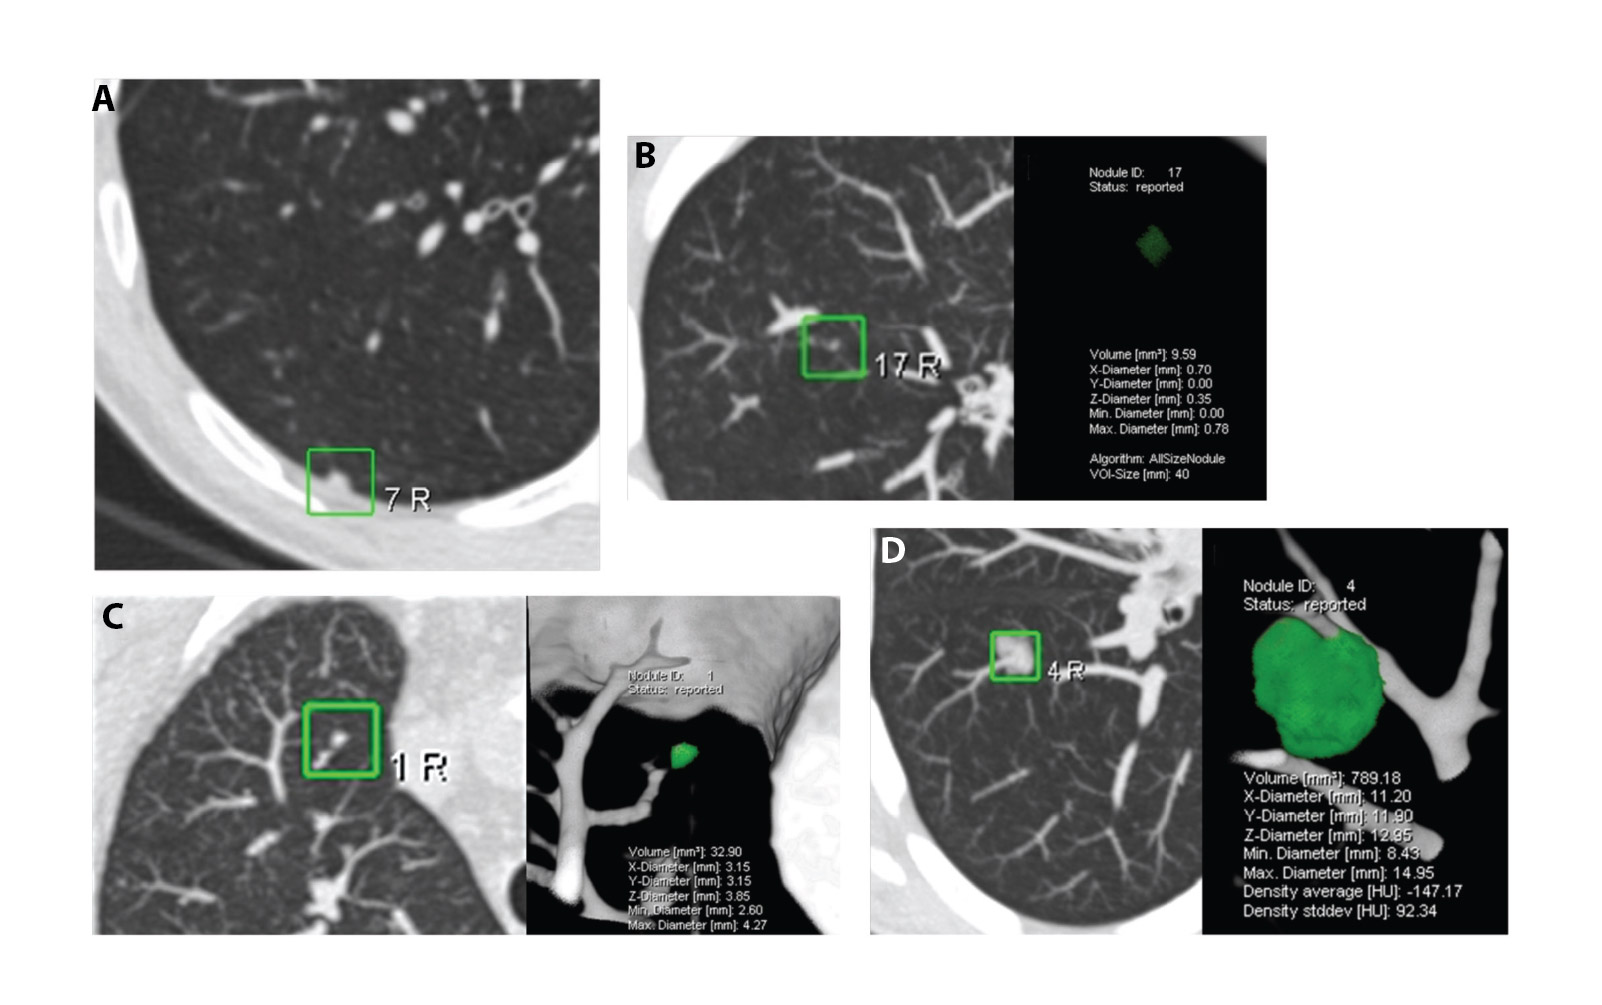 Implementation of Lung Cancer CT Screening: A Global Dream or a Real Possibility?